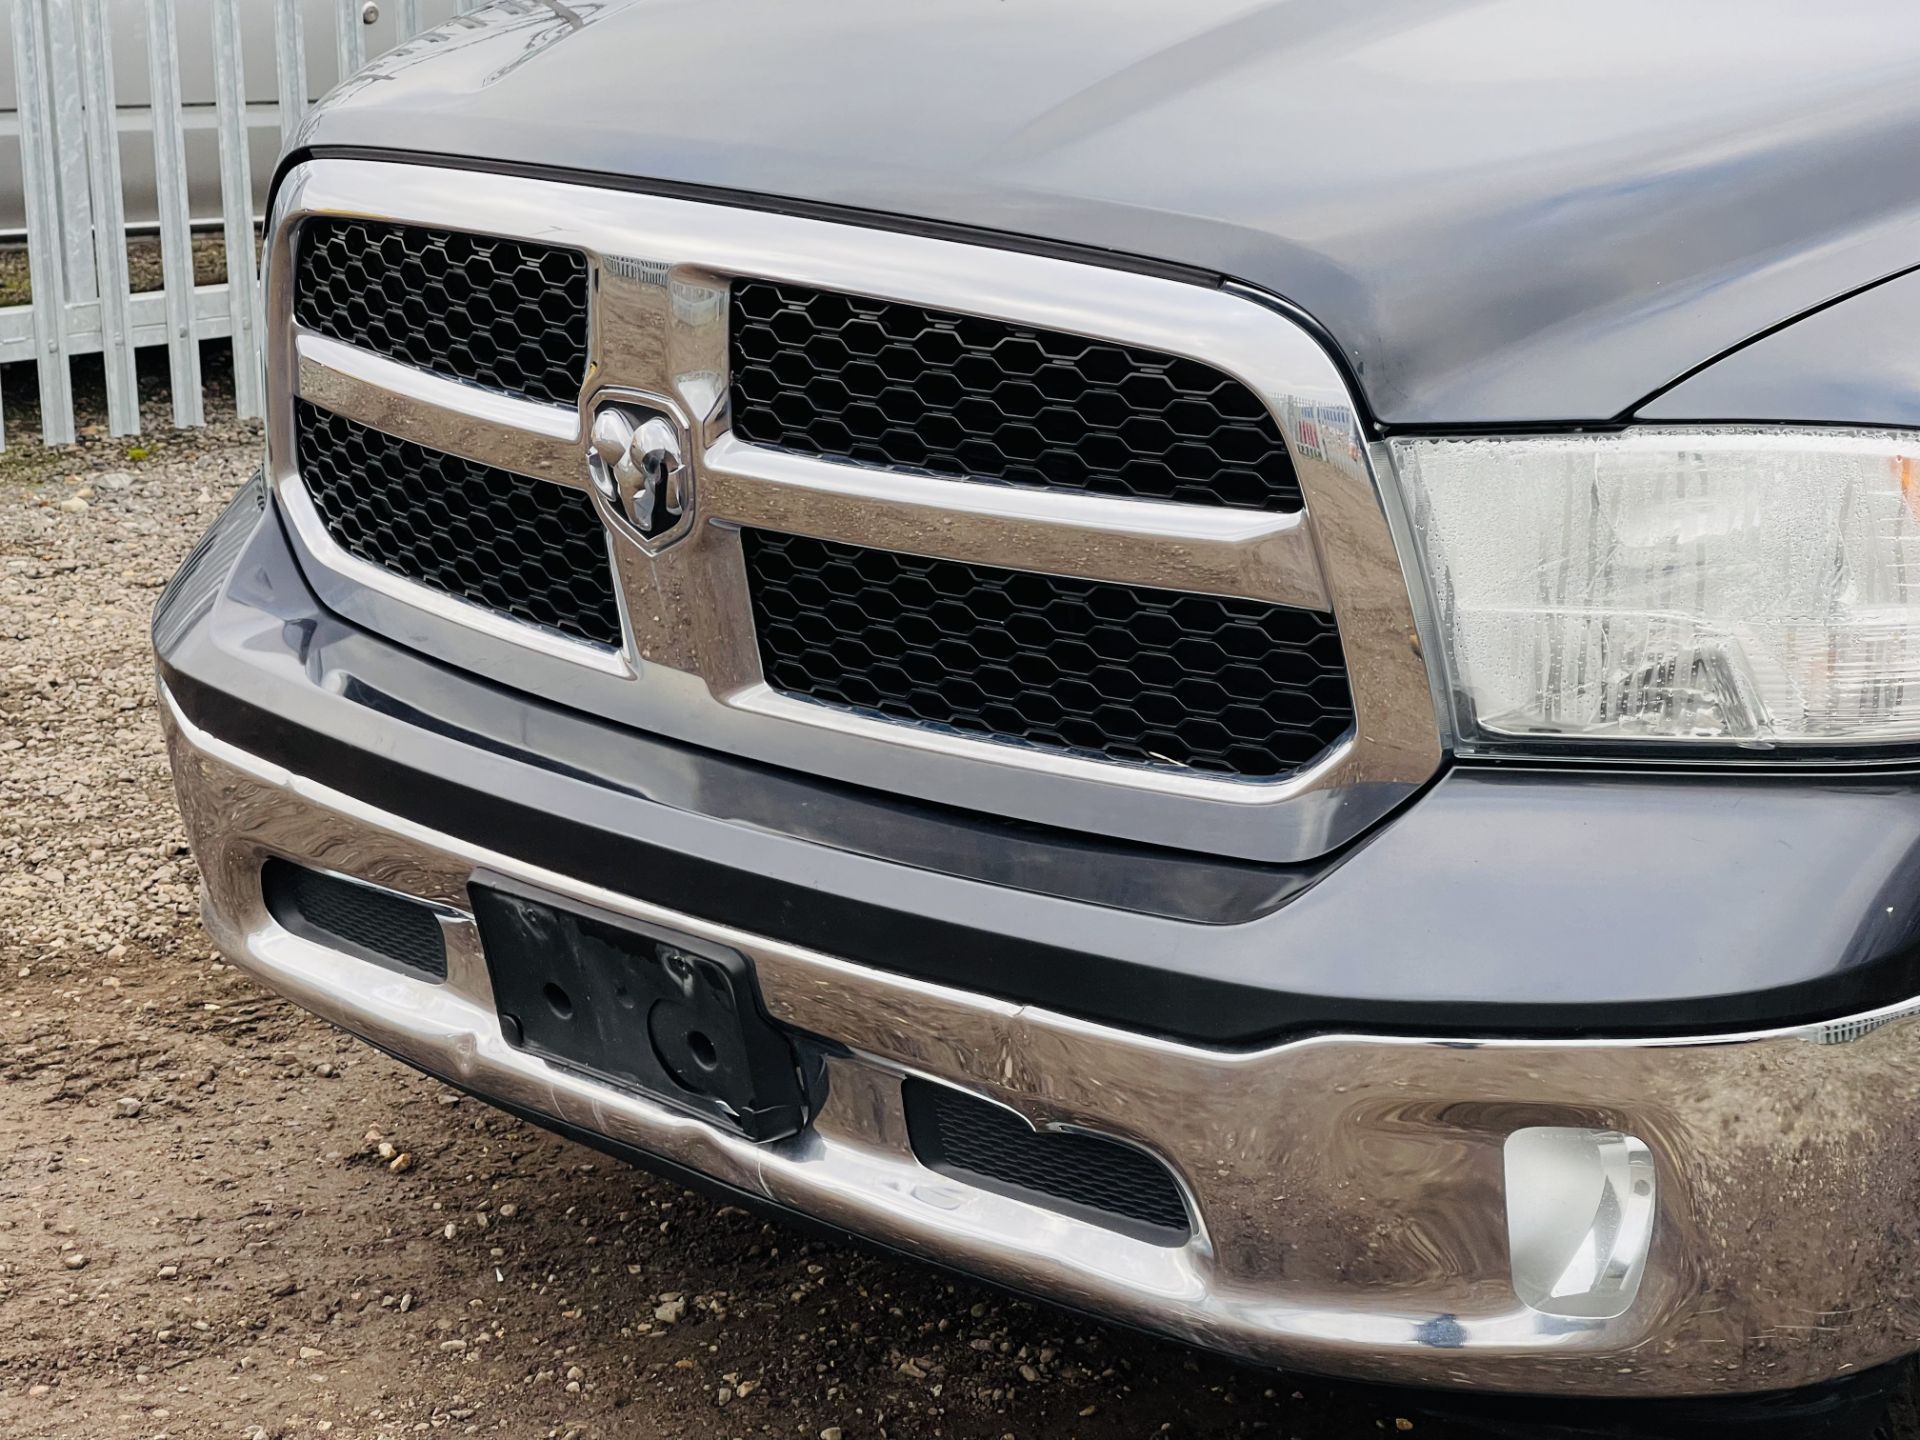 Dodge Ram 3.6 V6 1500 Crew Cab SLT 4WD ' 2015 Year ' A/C - 6 Seats - Chrome Package - Image 3 of 21